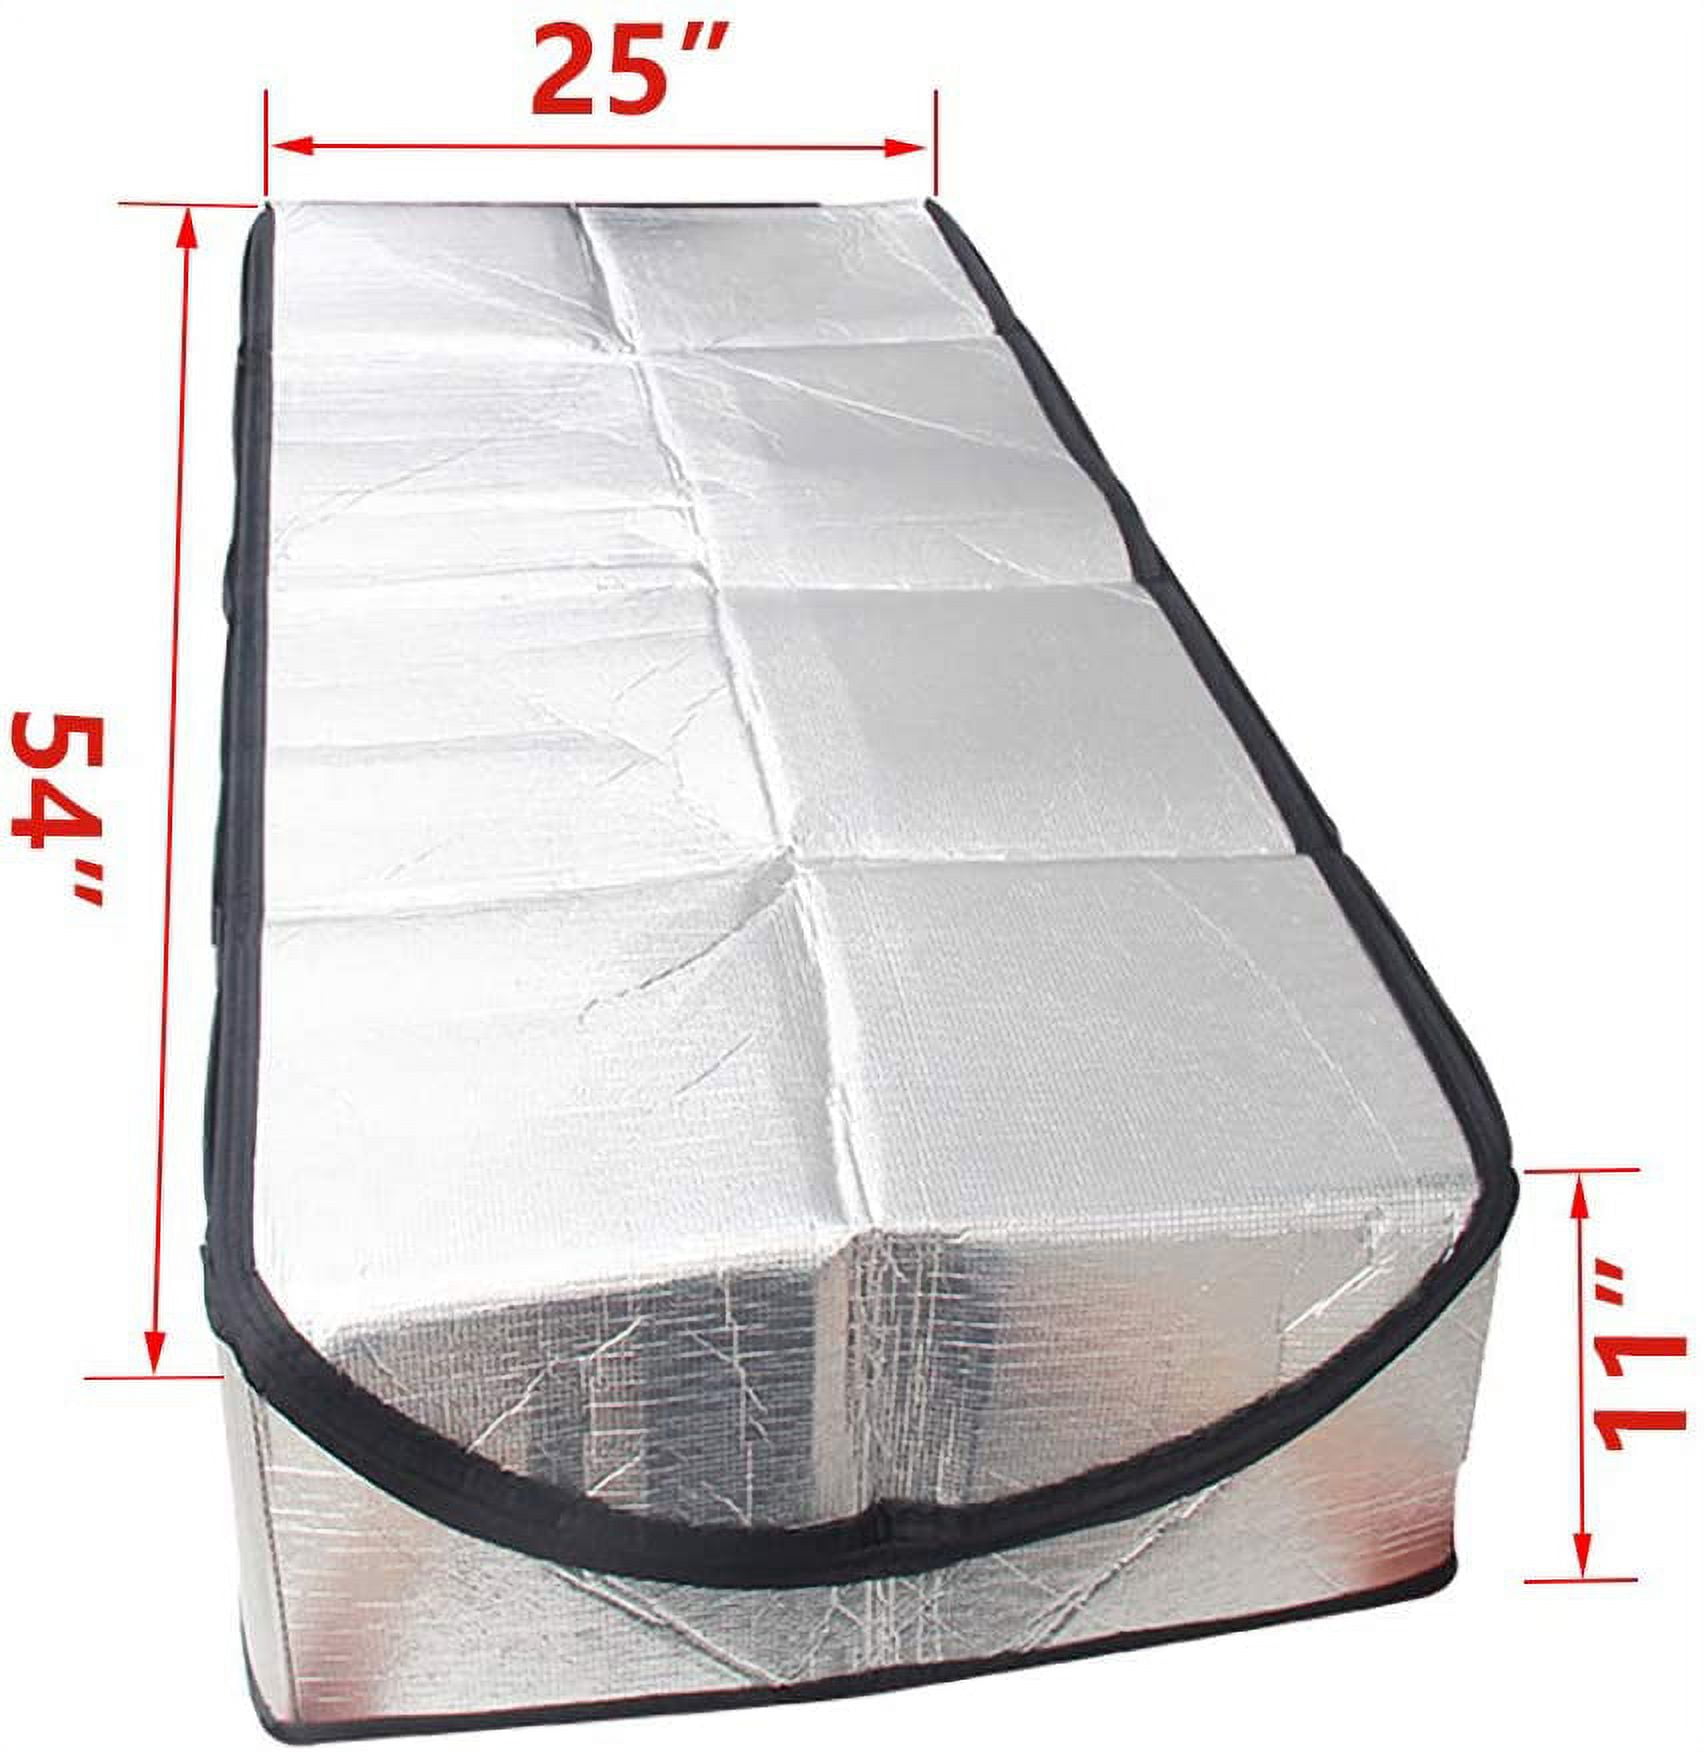 Dropship ABC Attic Stairs Insulation Cover 25x54x11 Pack Of 10